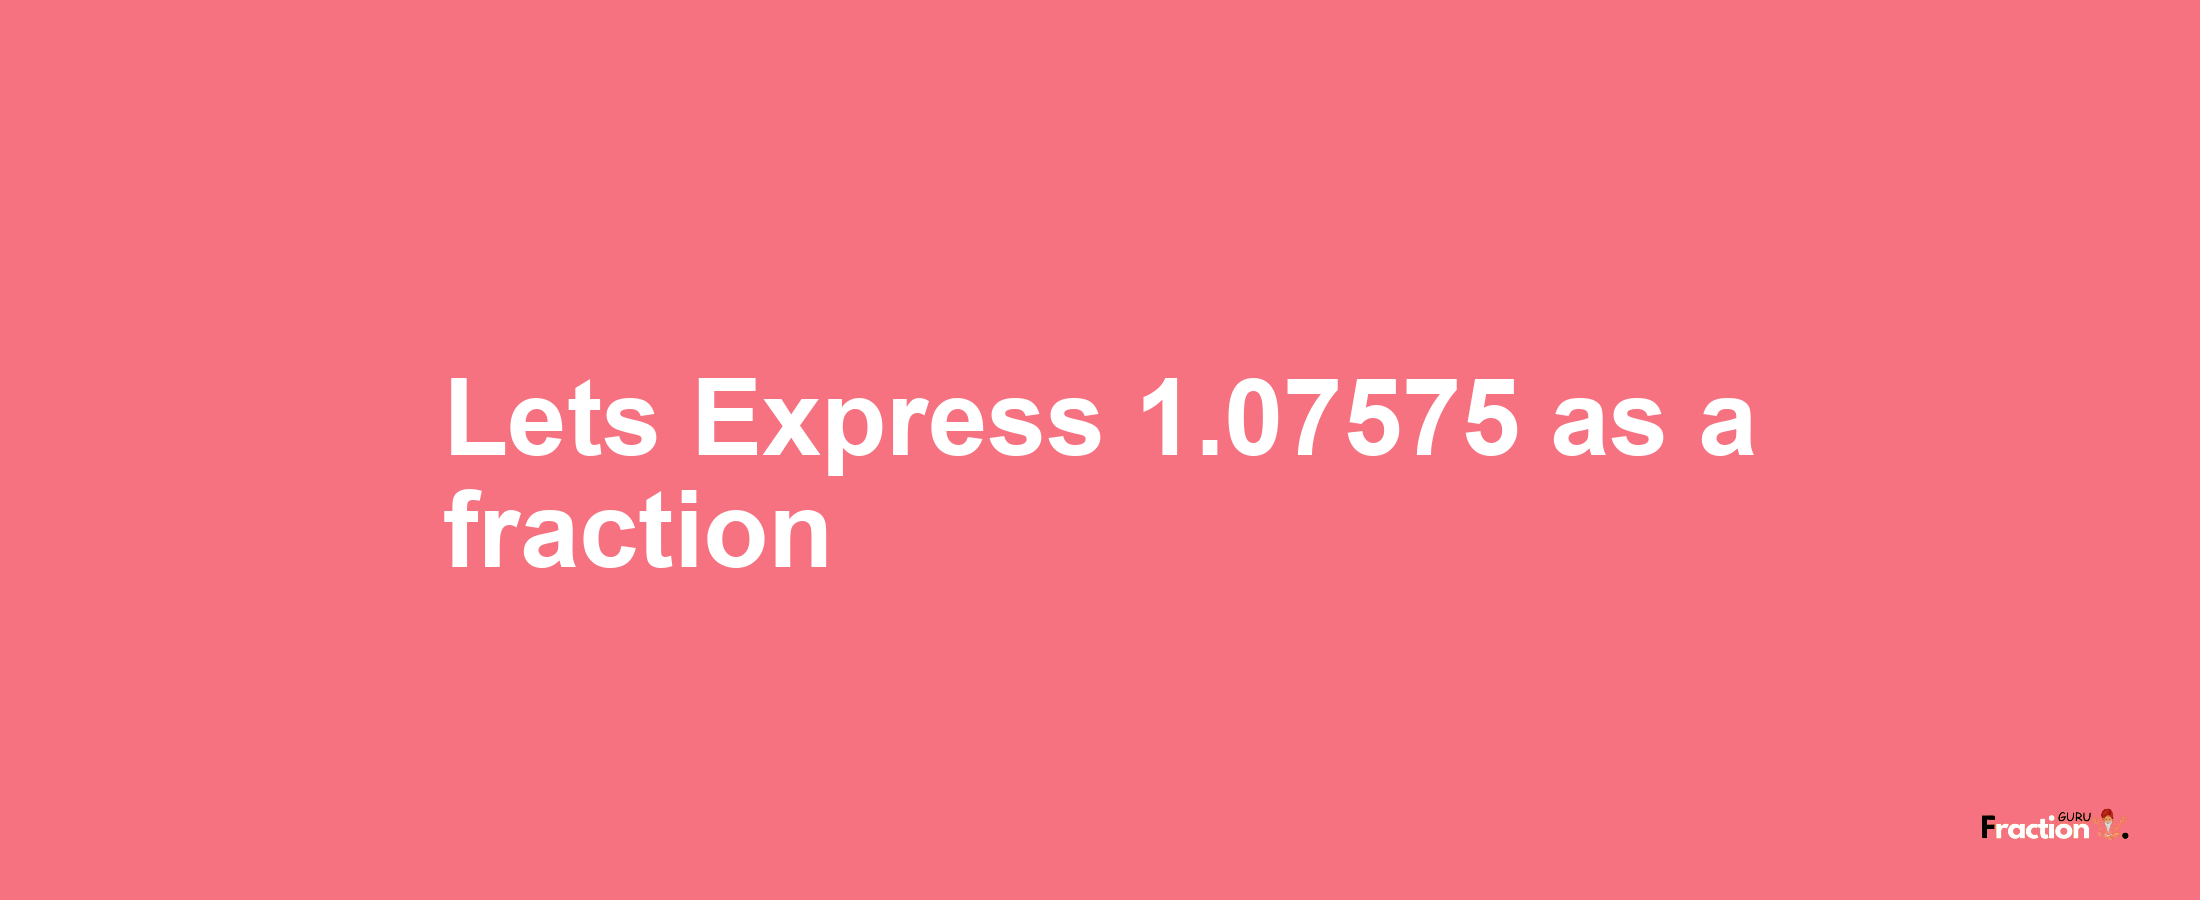 Lets Express 1.07575 as afraction